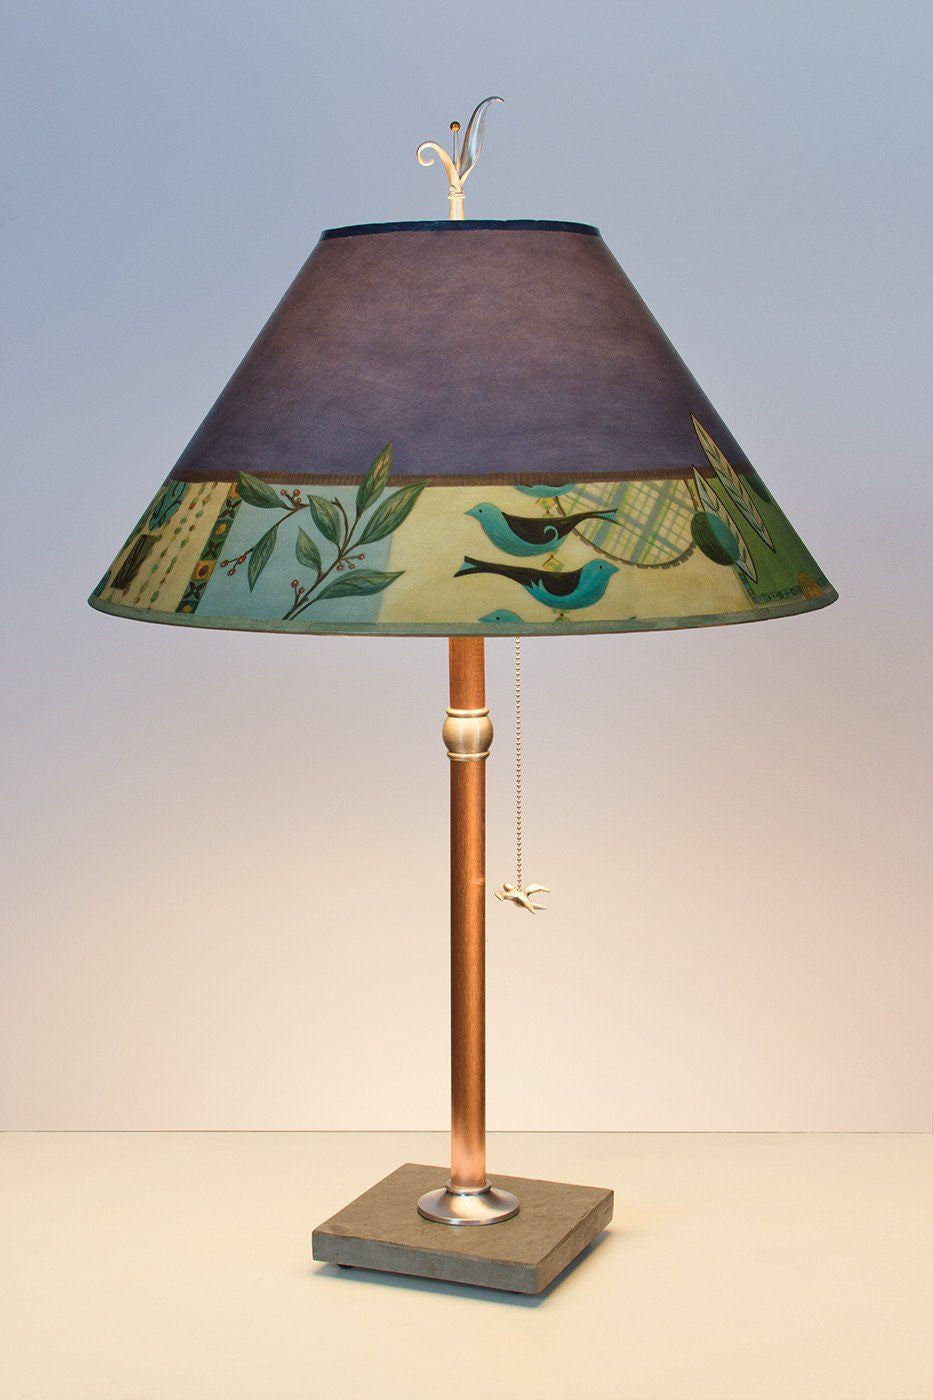 Copper Table Lamp on Vermont Slate with Large Conical Shade in New Capri Periwinkle